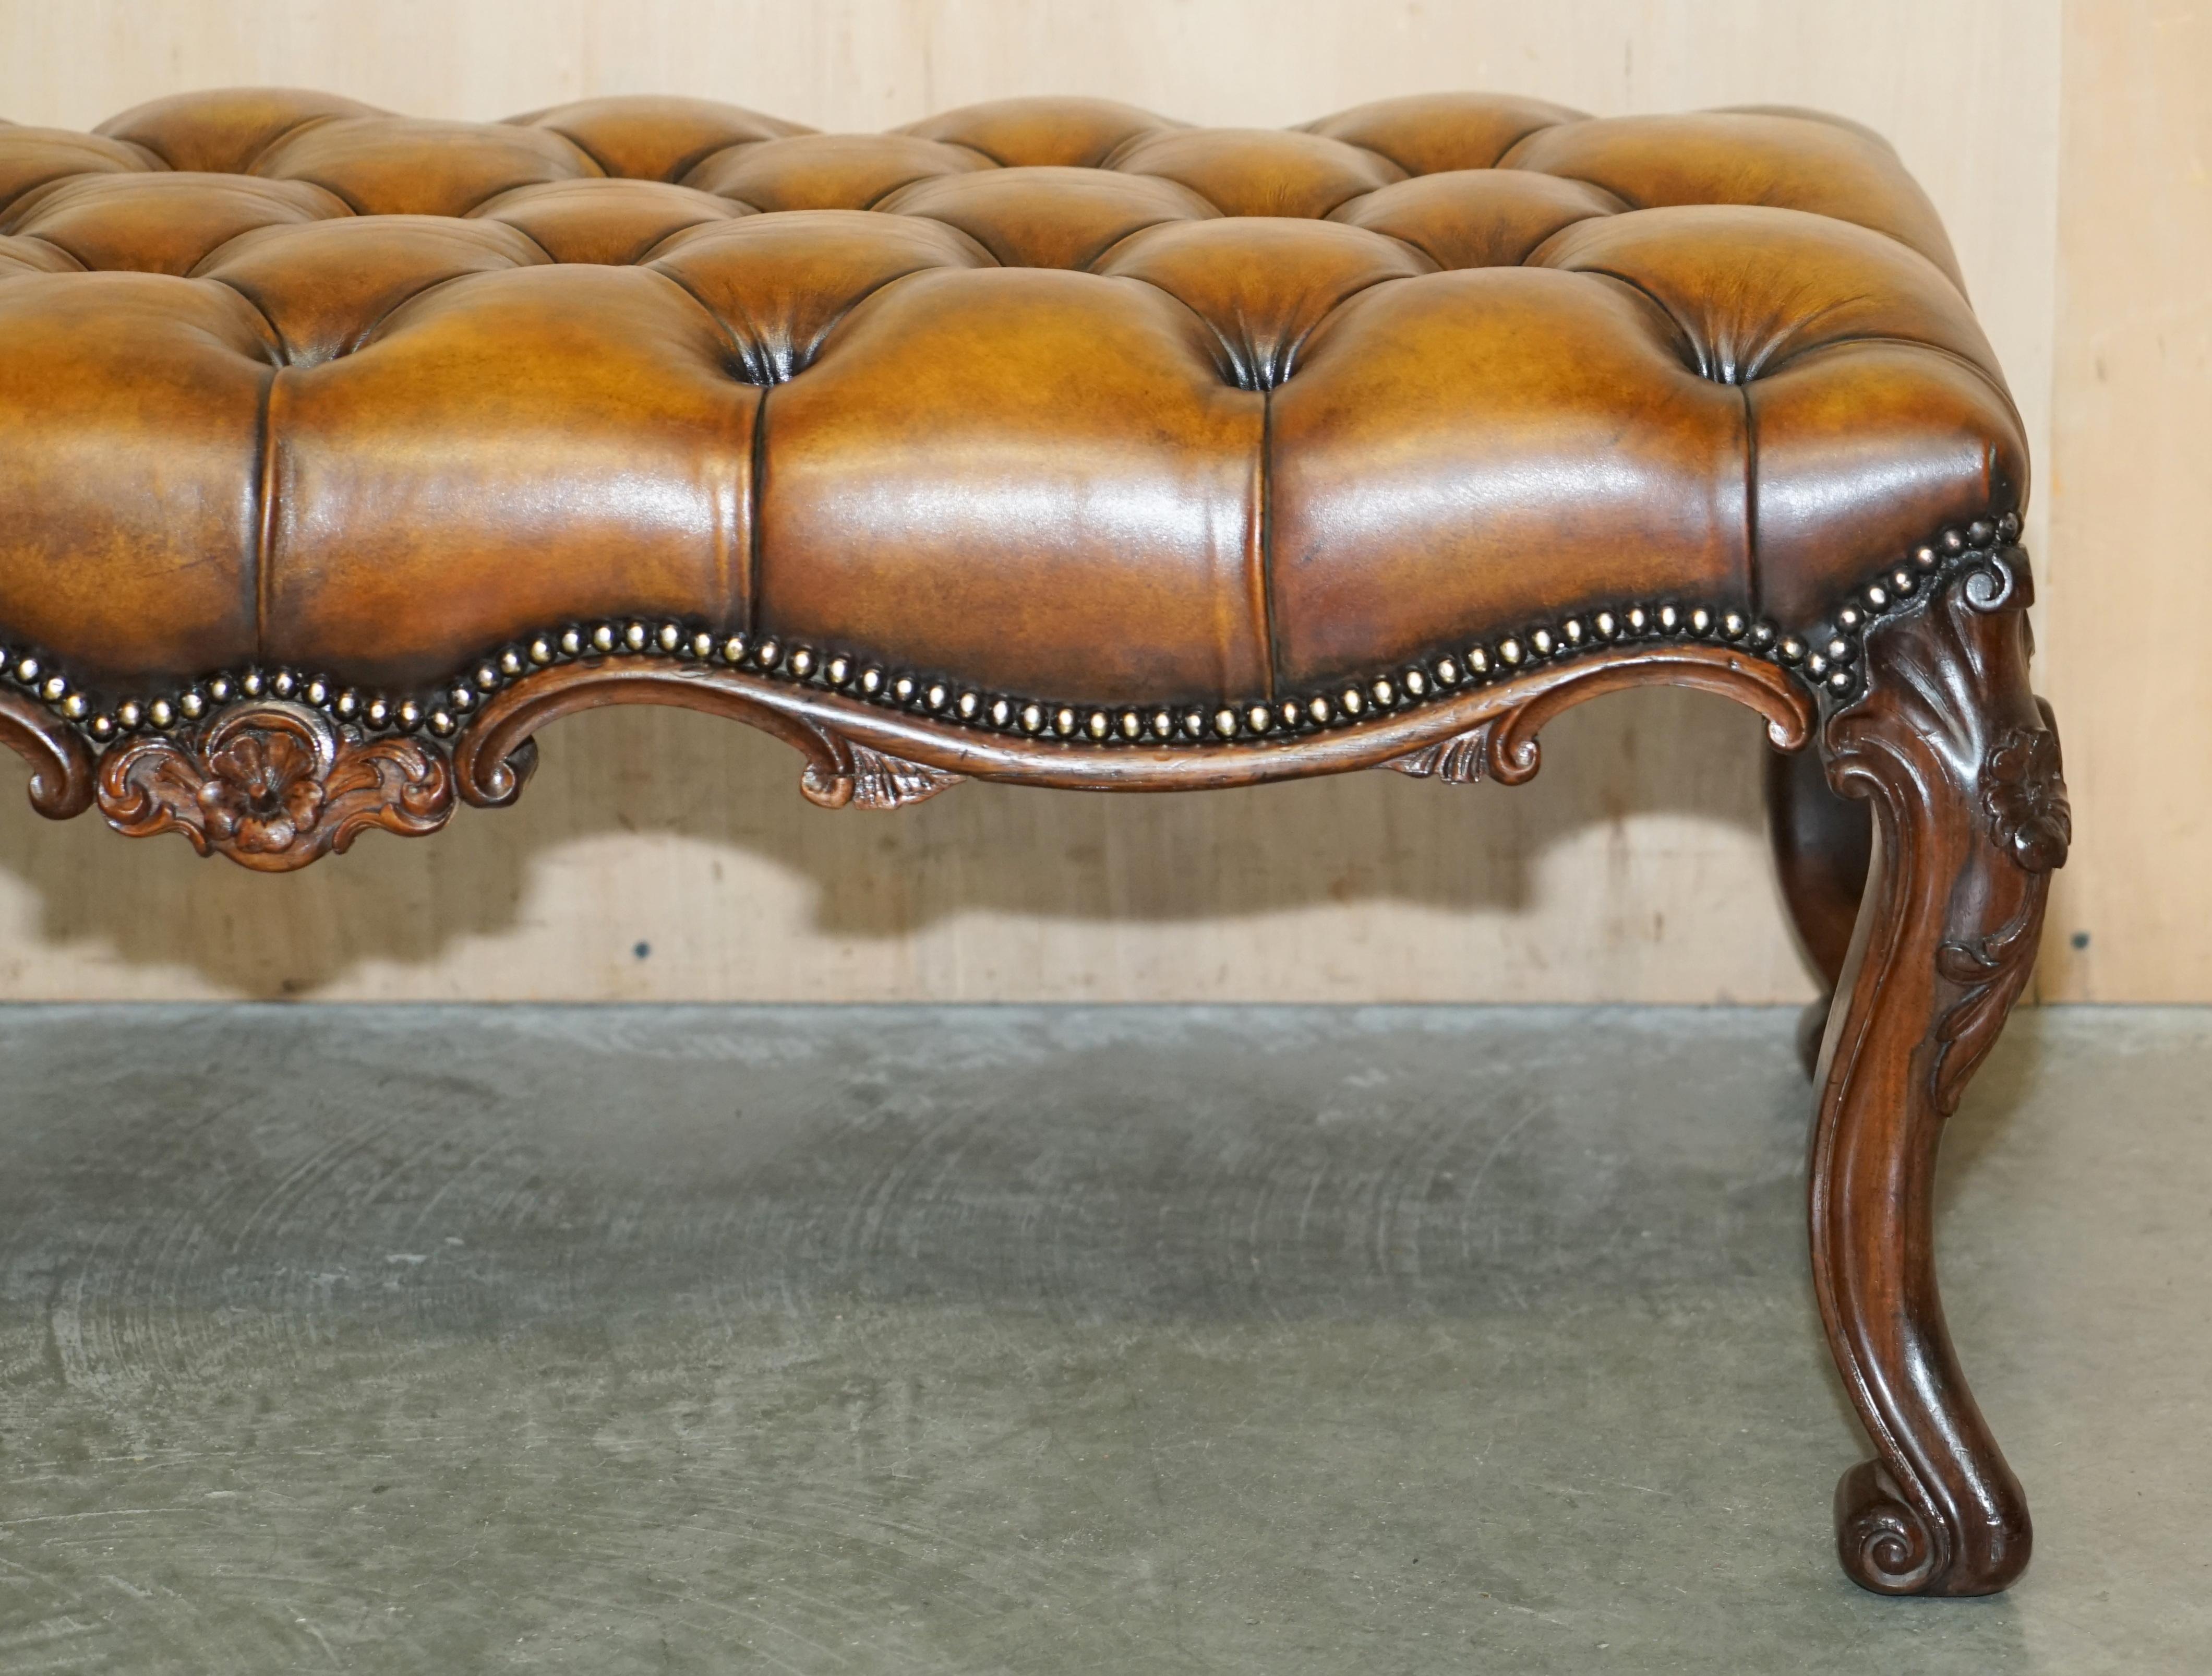 FINE ANTIQUE ViCTORIAN HARDWOOD SHOW FRAME CHESTERFIELD BROWN LEATHER FOOTSTOOL 3